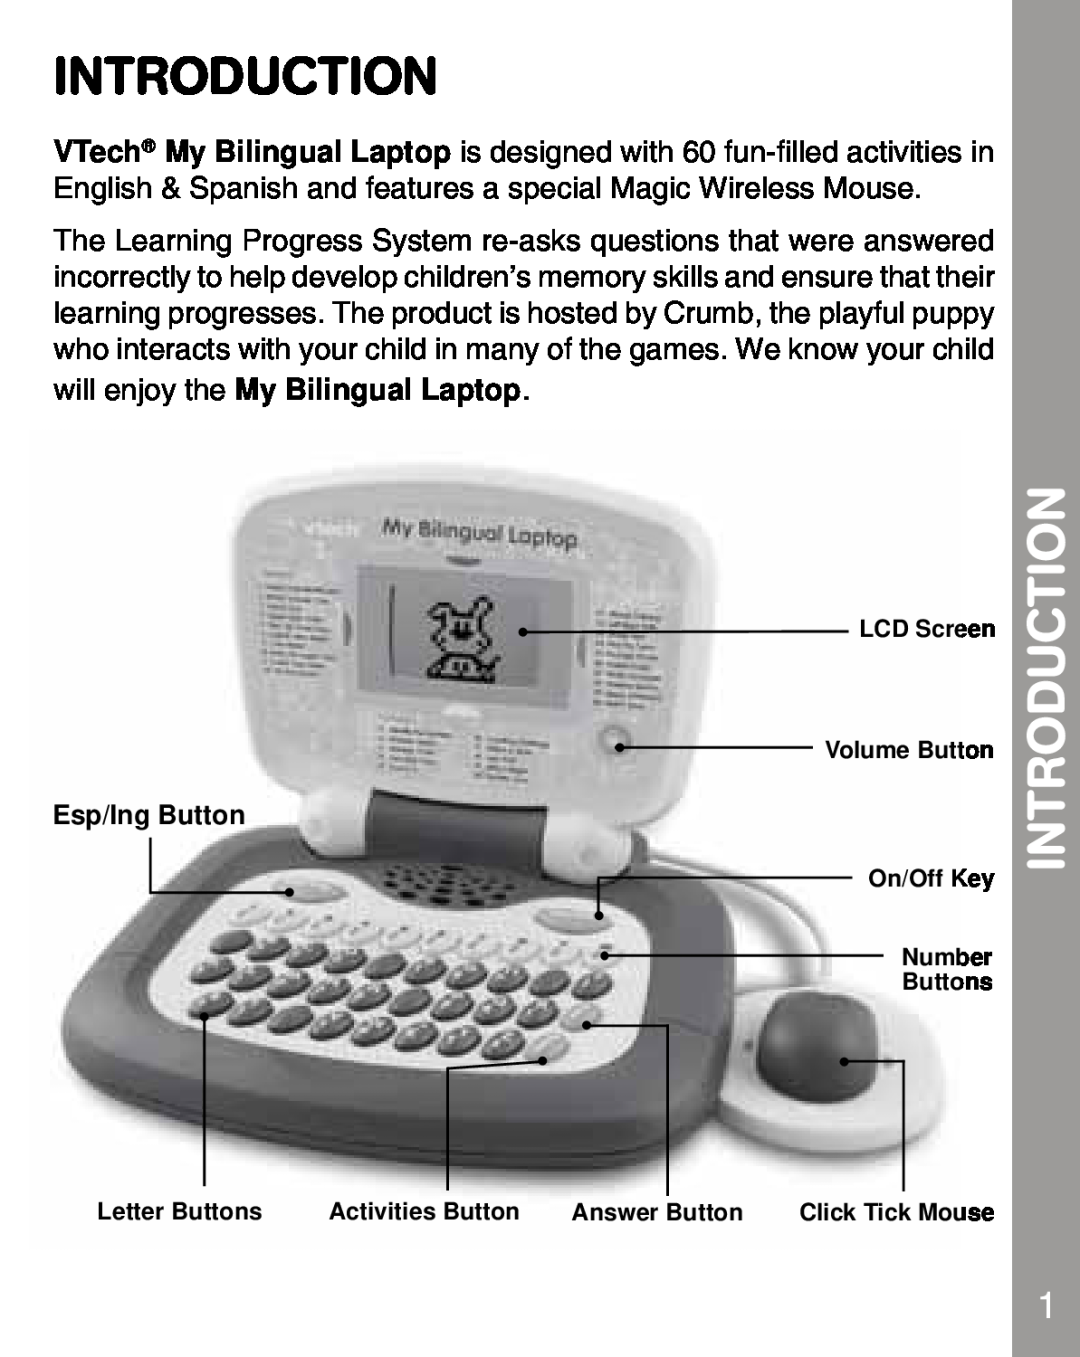 VTech 80-067848 Introduction, will enjoy the My Bilingual Laptop, Esp/Ing Button, LCD Screen Volume Button, Letter Buttons 